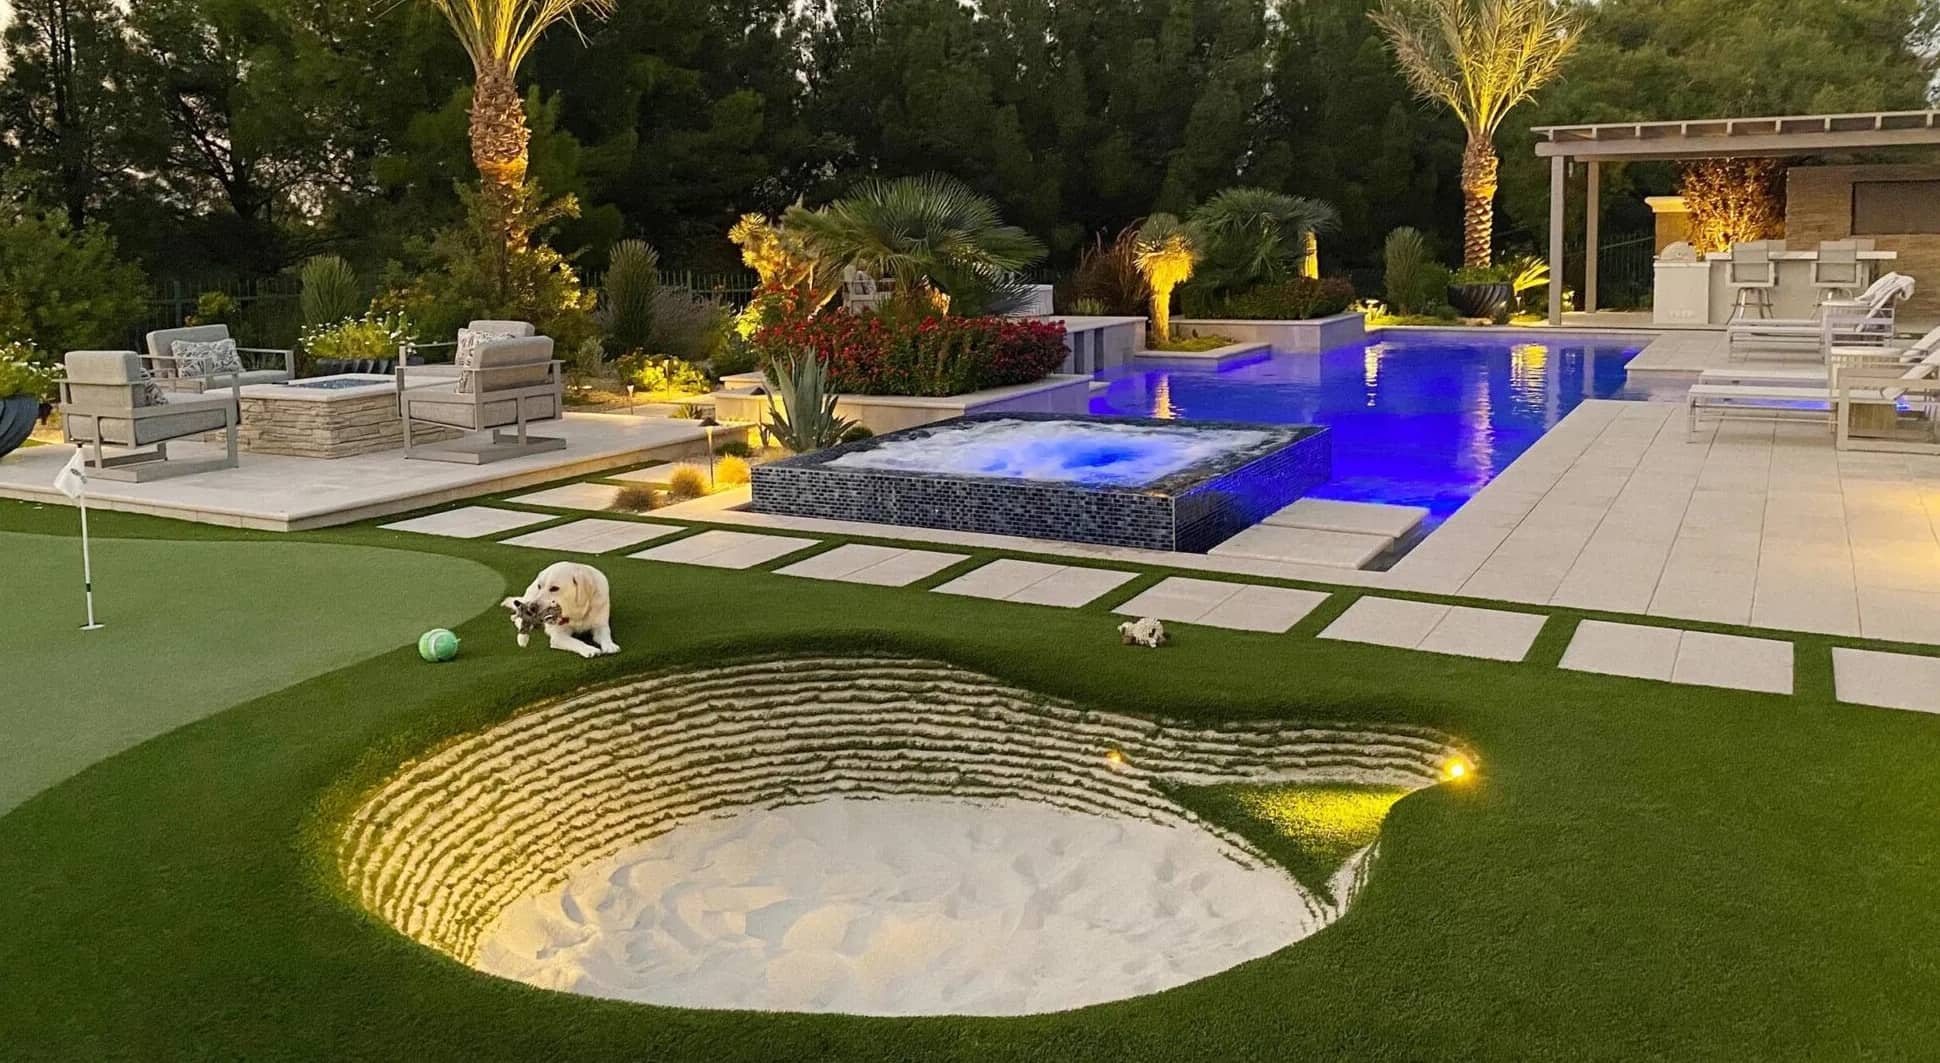 How To Make A Putting Green In Your Backyard With Real Grass